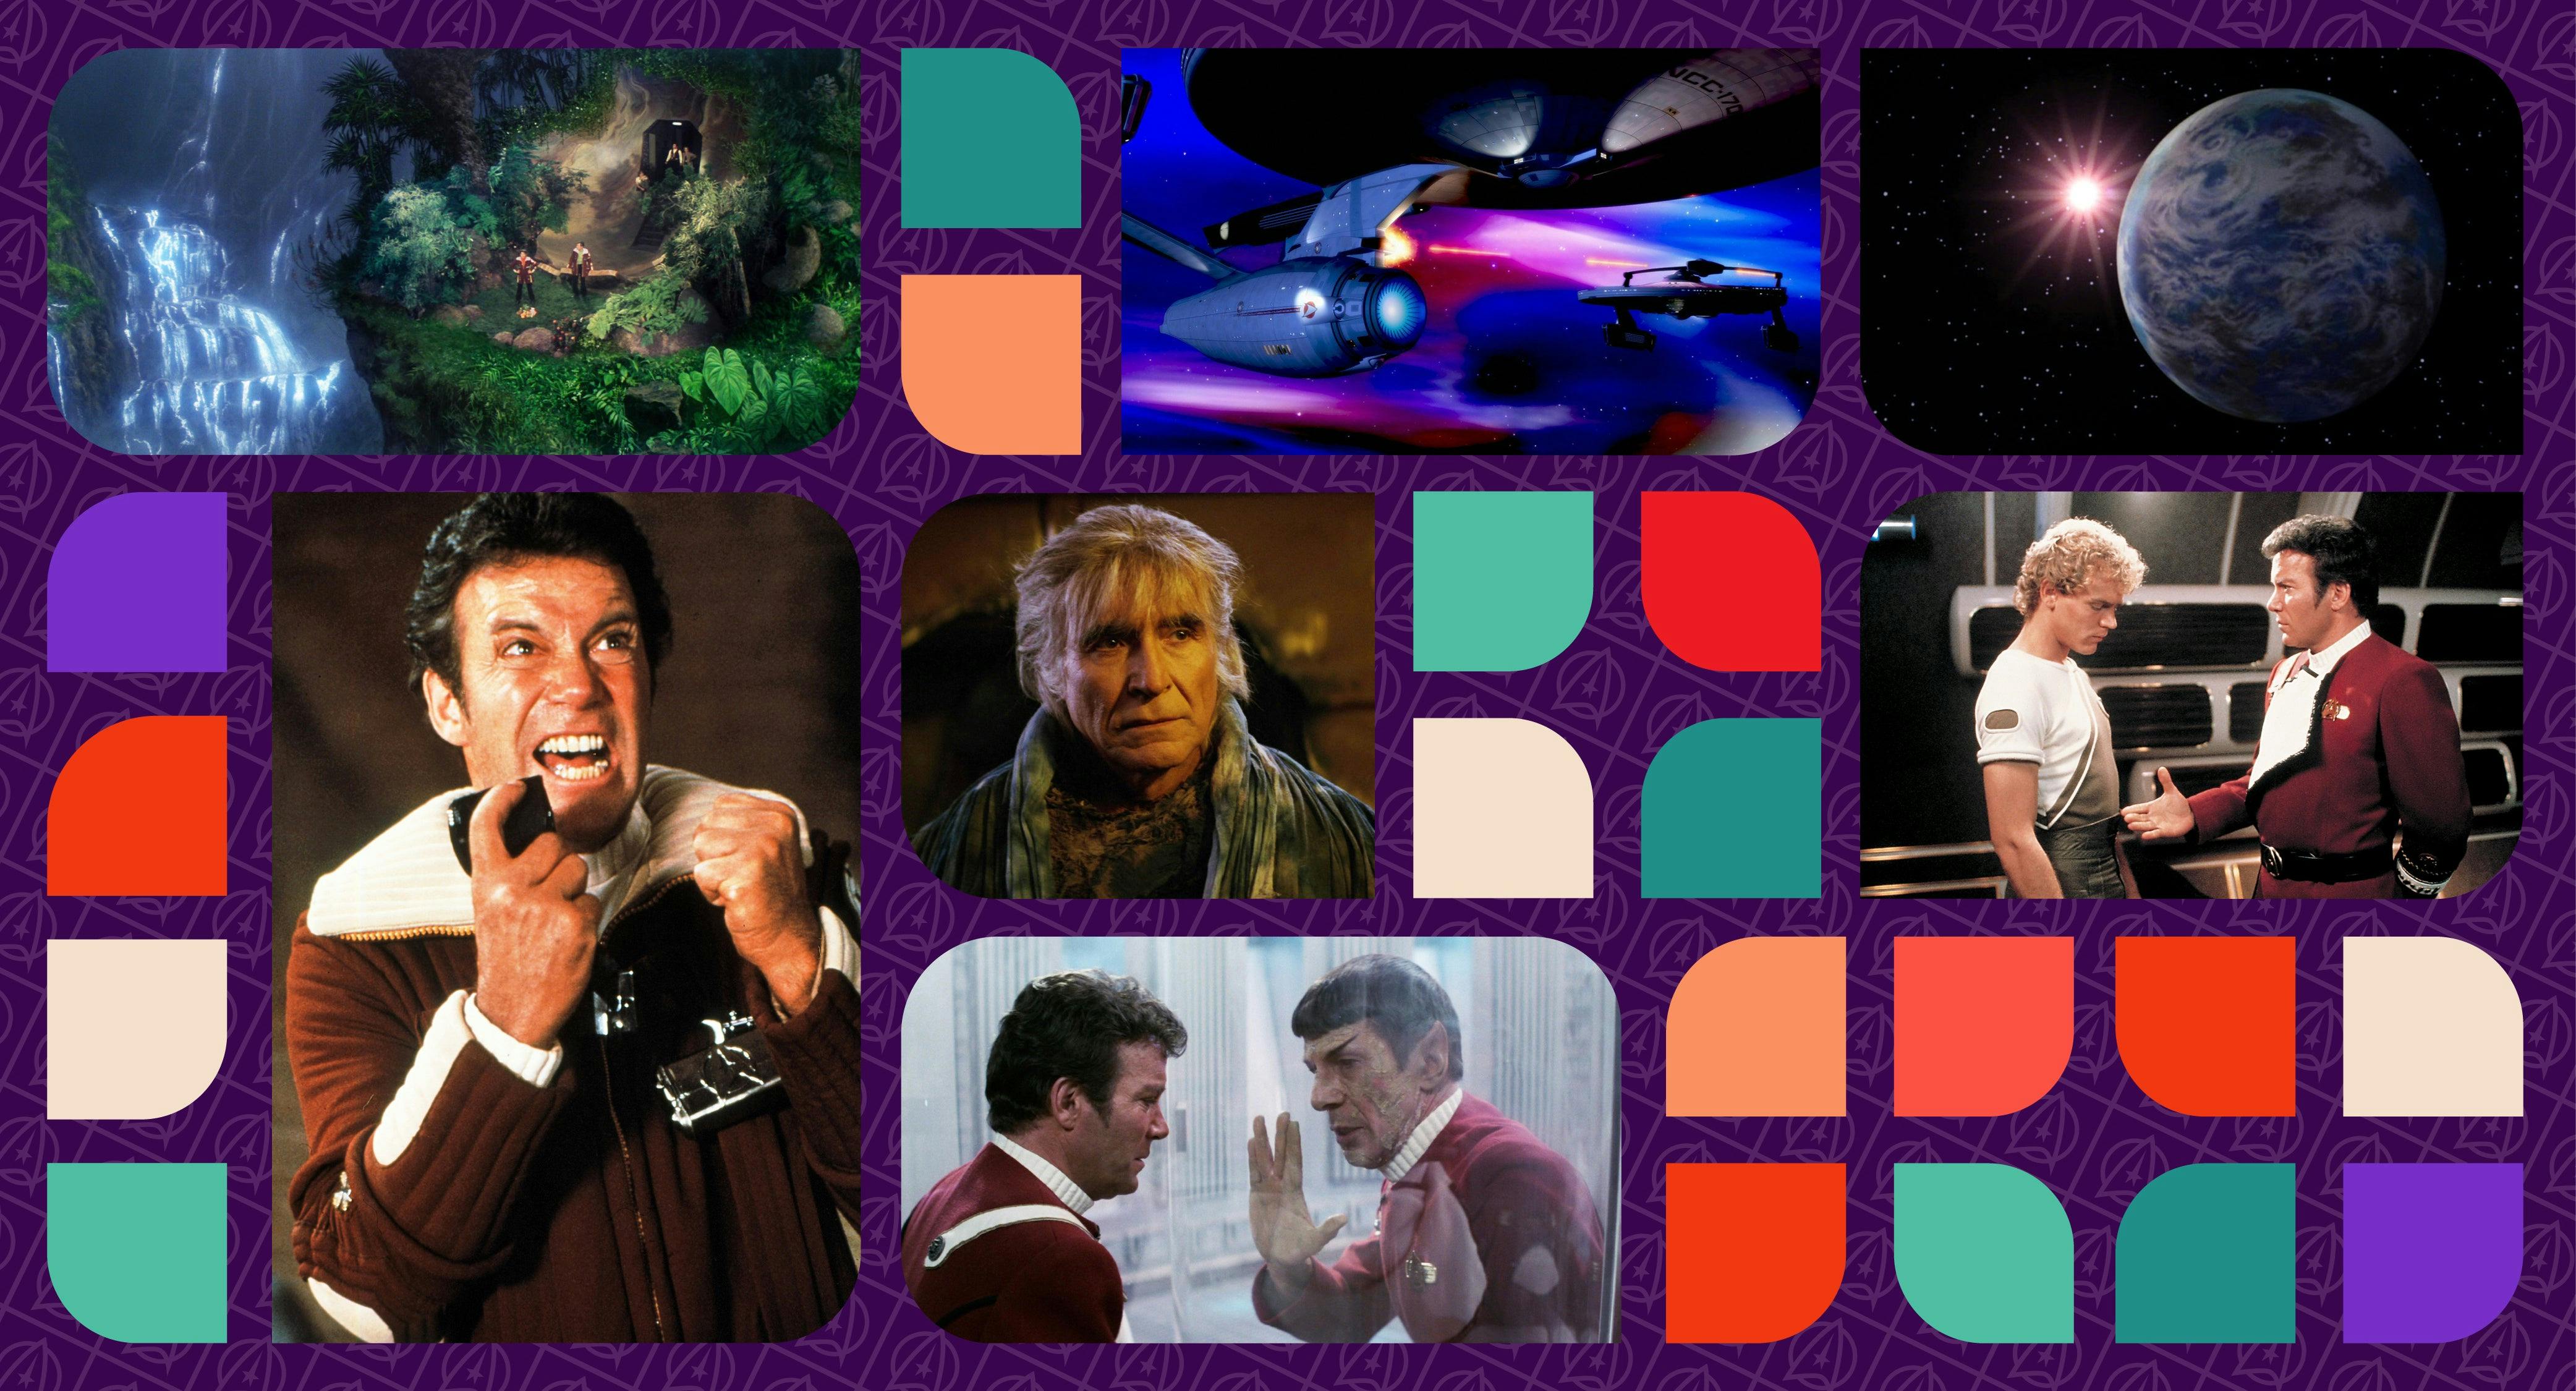 A collage of images from the film Star Trek II: The Wrath of Khan.